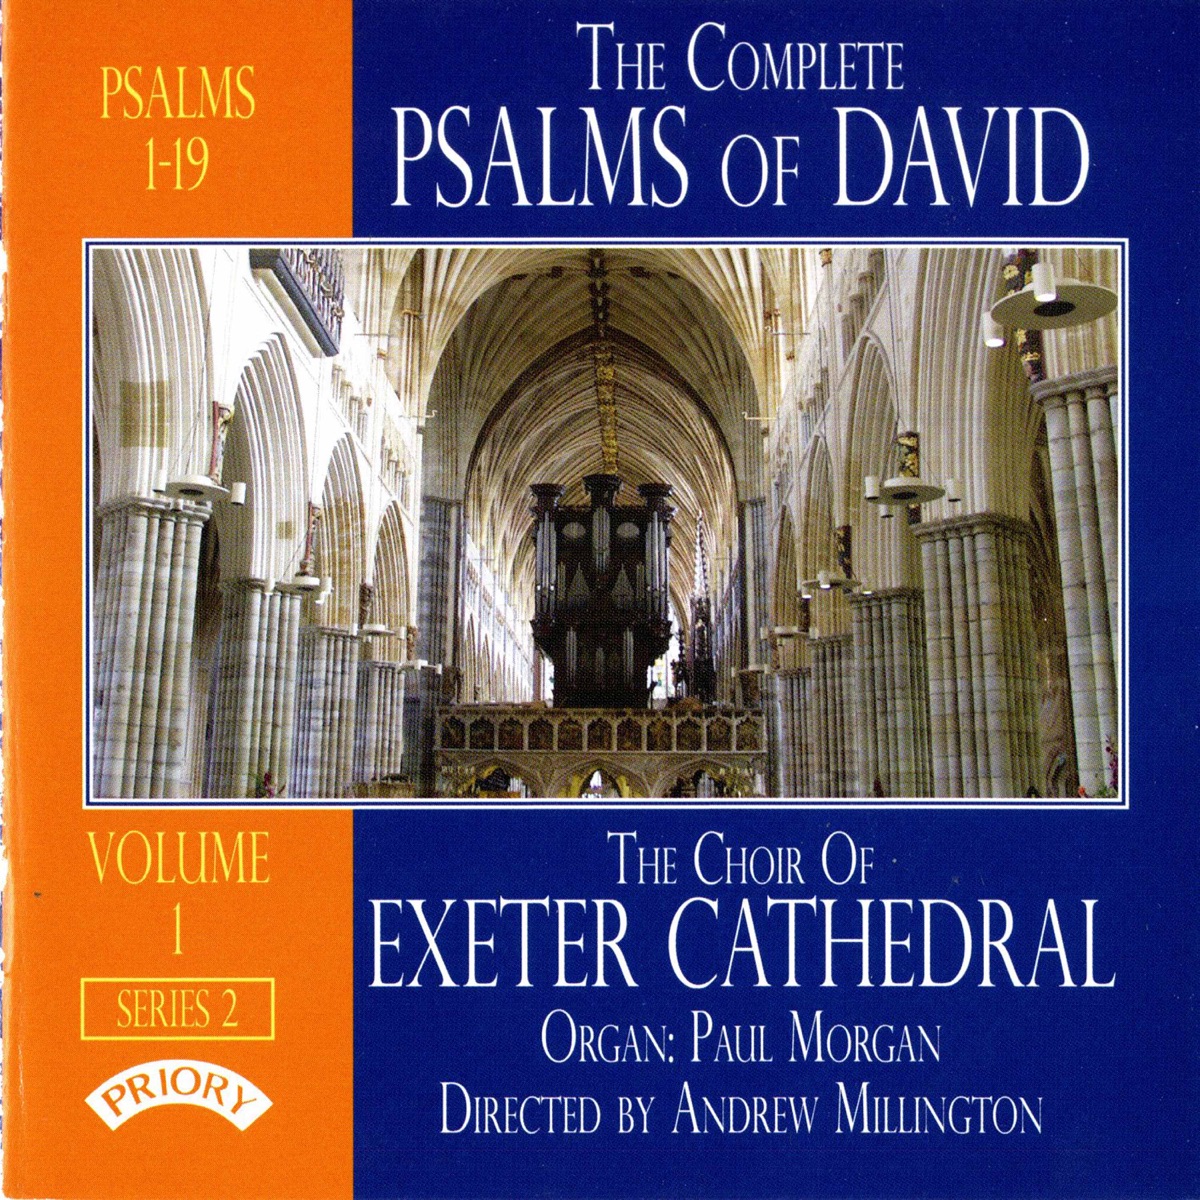 Exeter Cathedral Choir, Paul Morgan & Andrew Millington - The Complete Psalms of David, Vol. 1